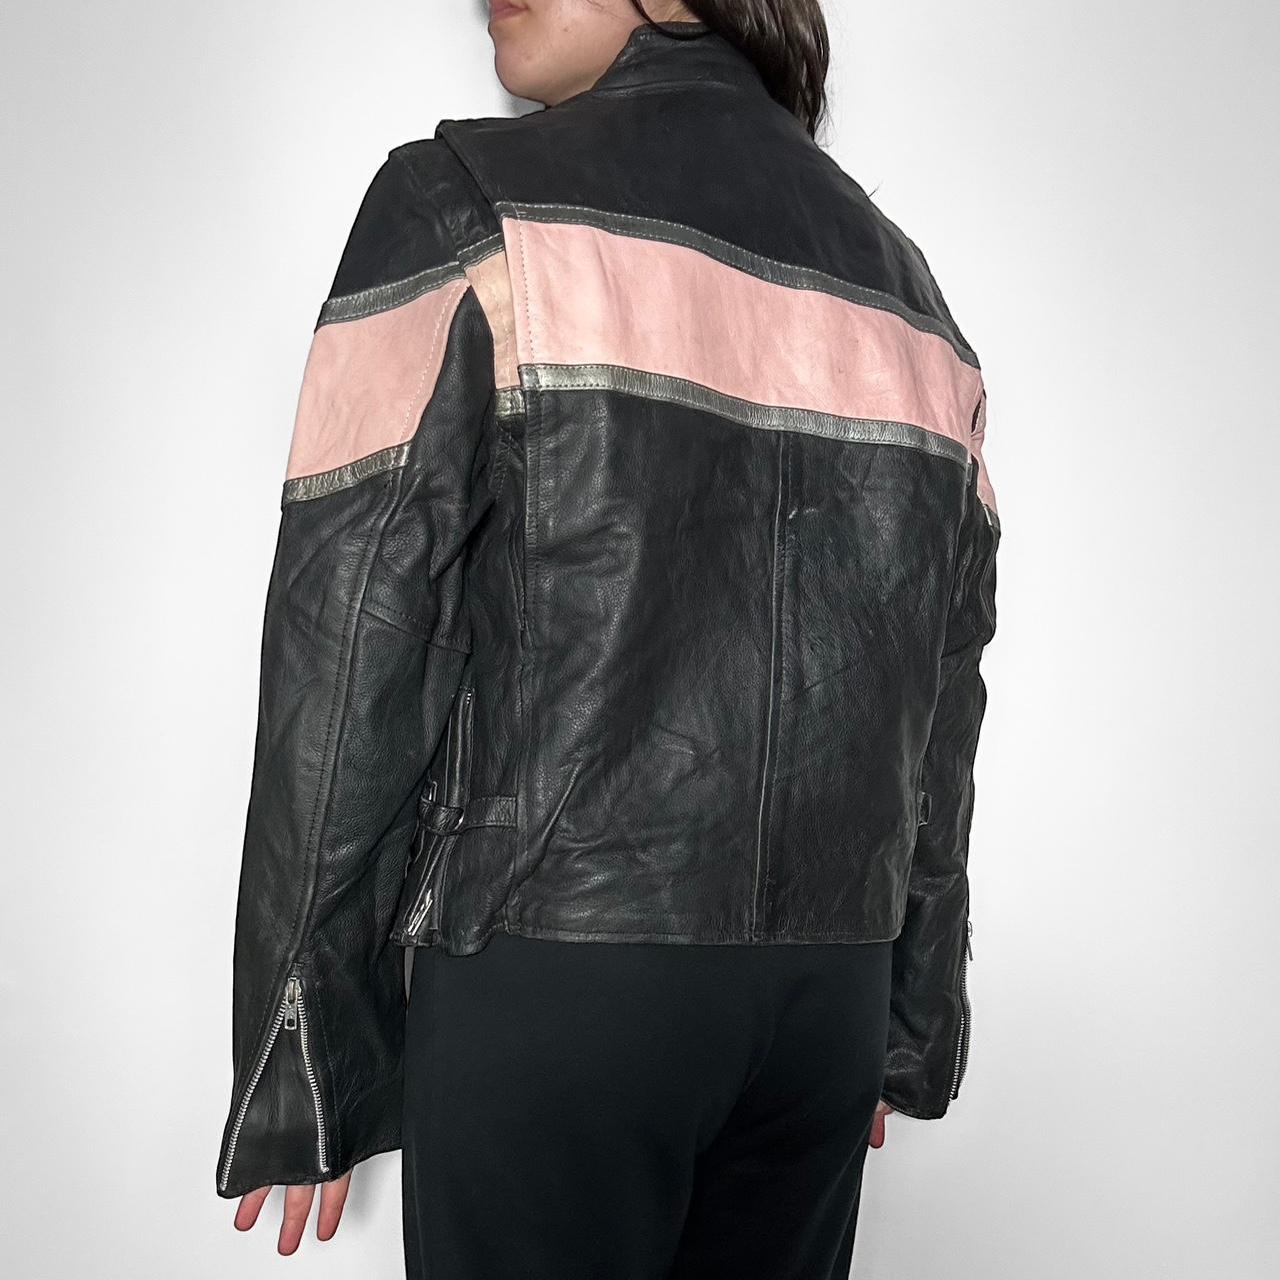 Vintage 90s real leather motorcycle racing jacket in black and pink